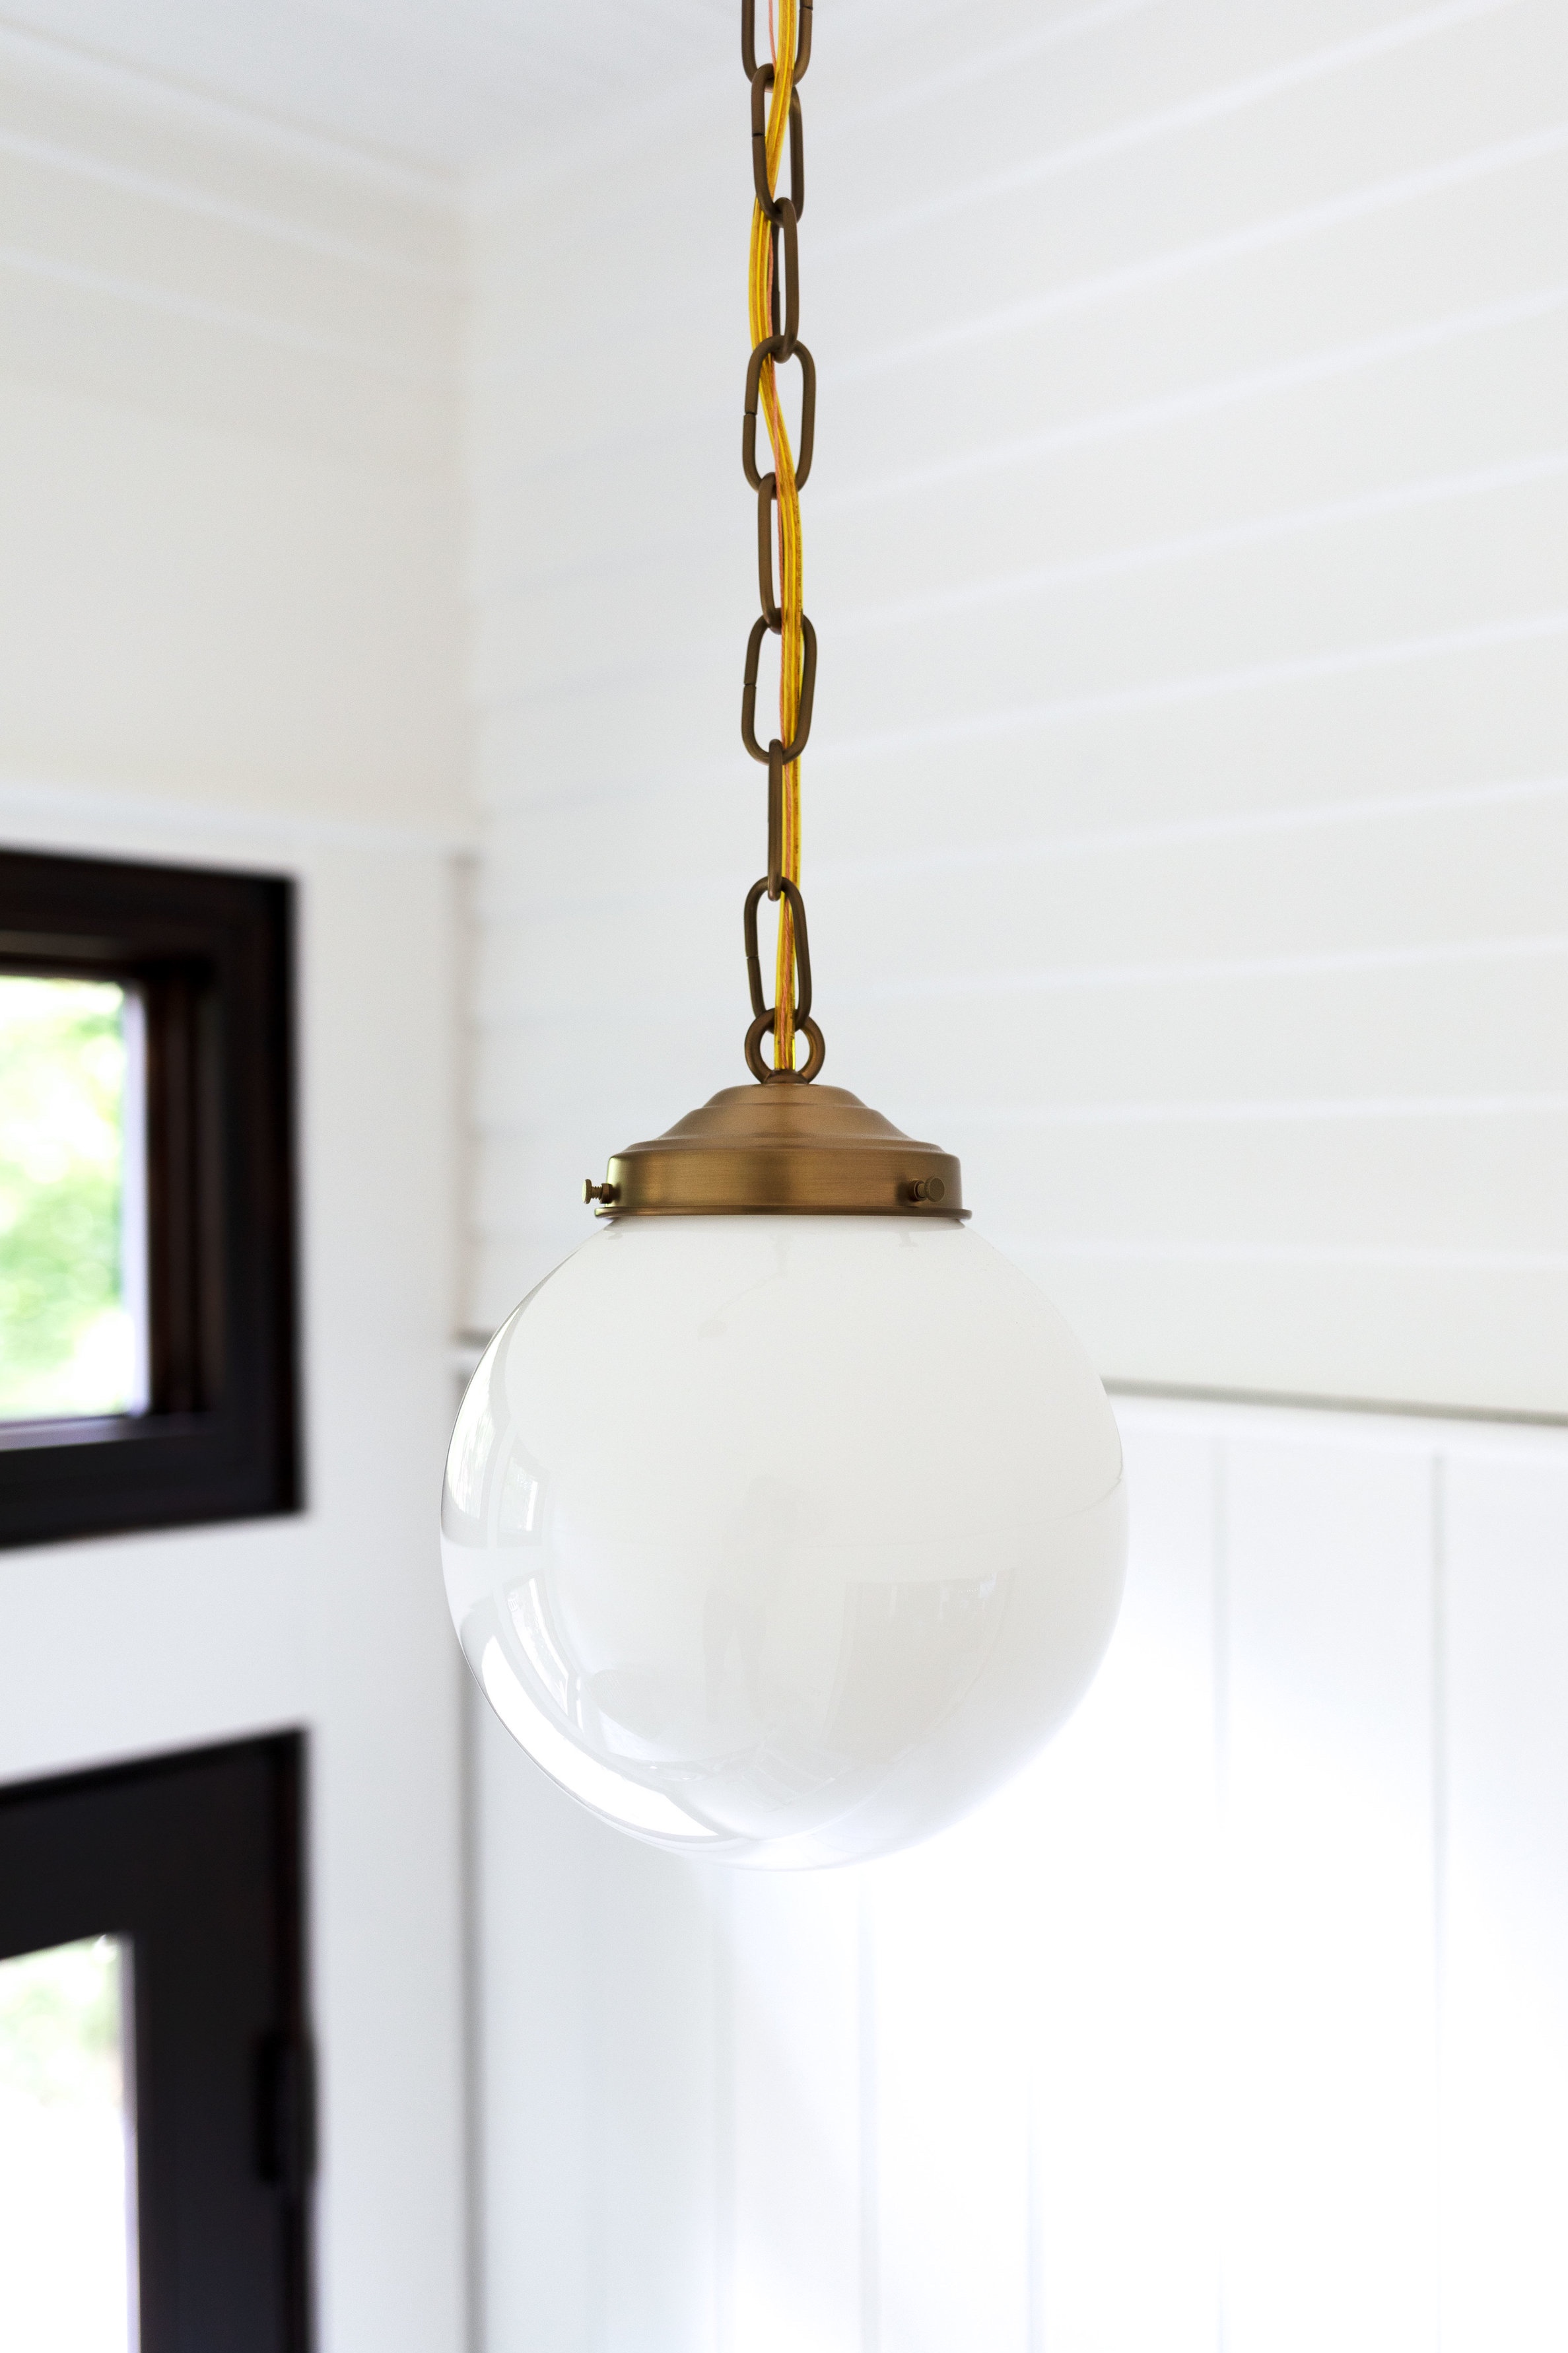 How To Add Ceiling Lights Without Wiring How To Install A Ceiling